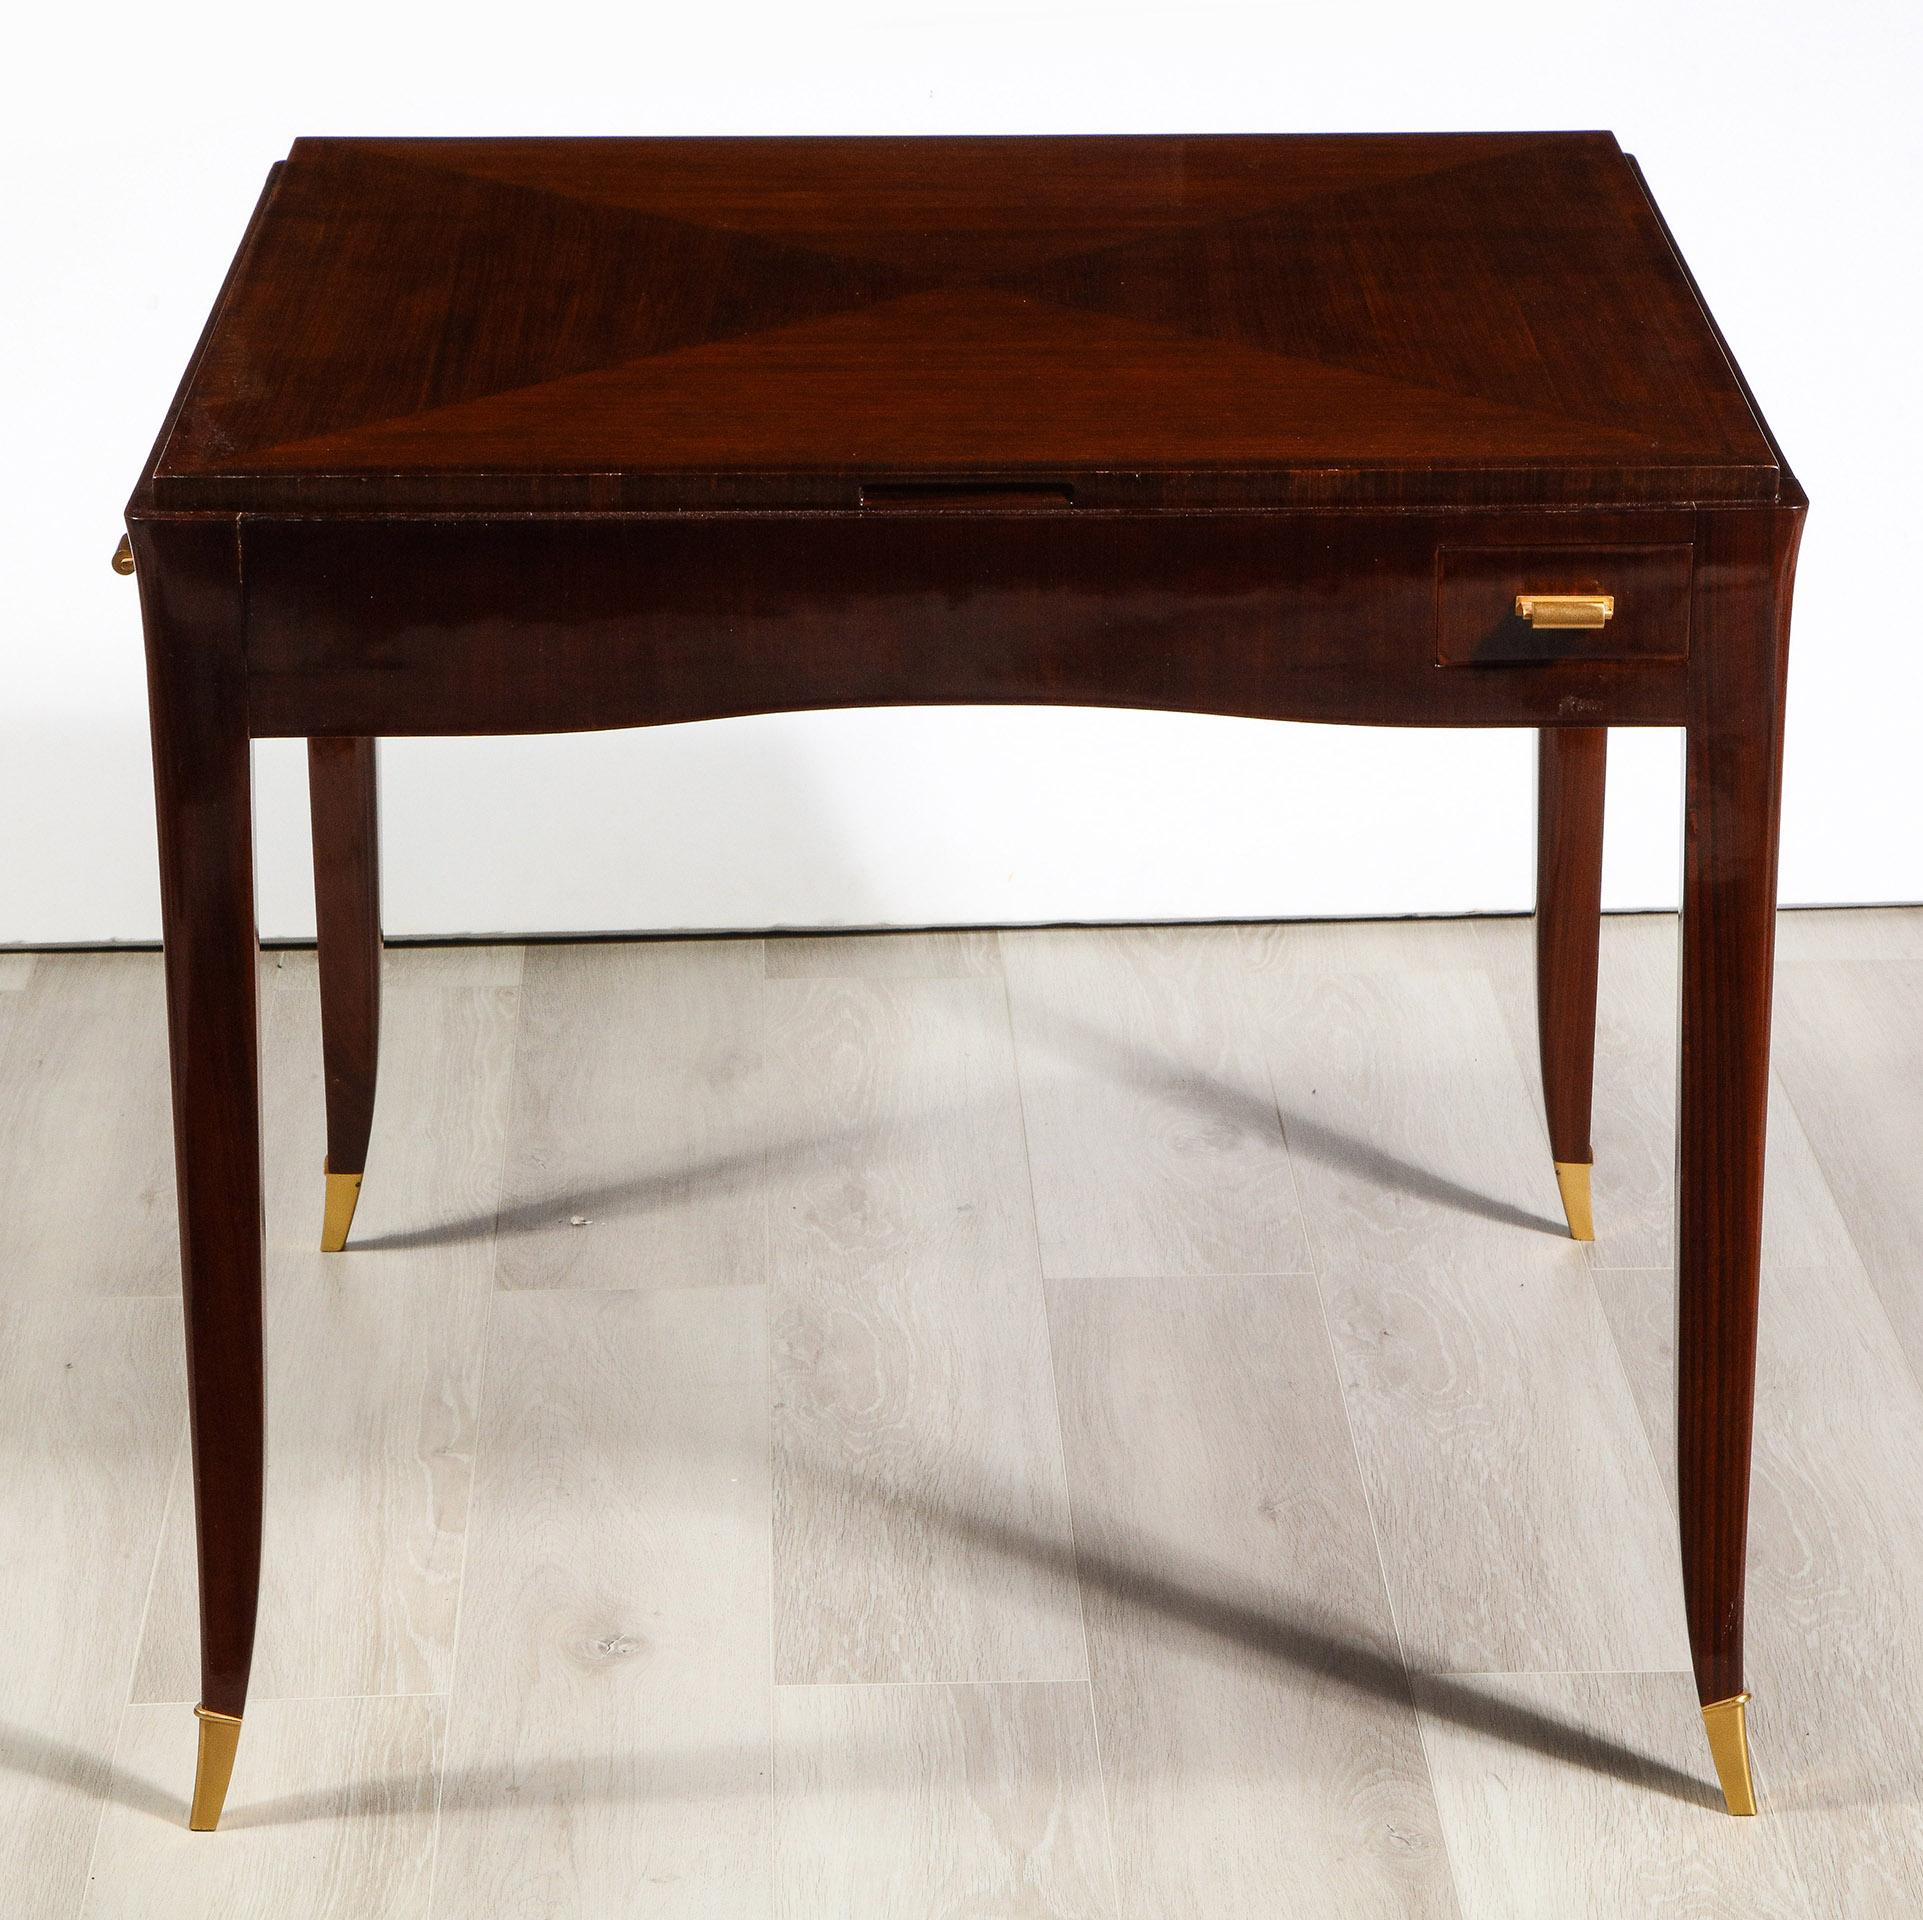 Having a quartered veneered removable top verso to show felt, the secondary top with inset storage well, the slightly concave apron with drinks drawers and gilt bronze pulls the tapered saber legs with gilt bronze sabots
Branded Ruhlmann
Model No.